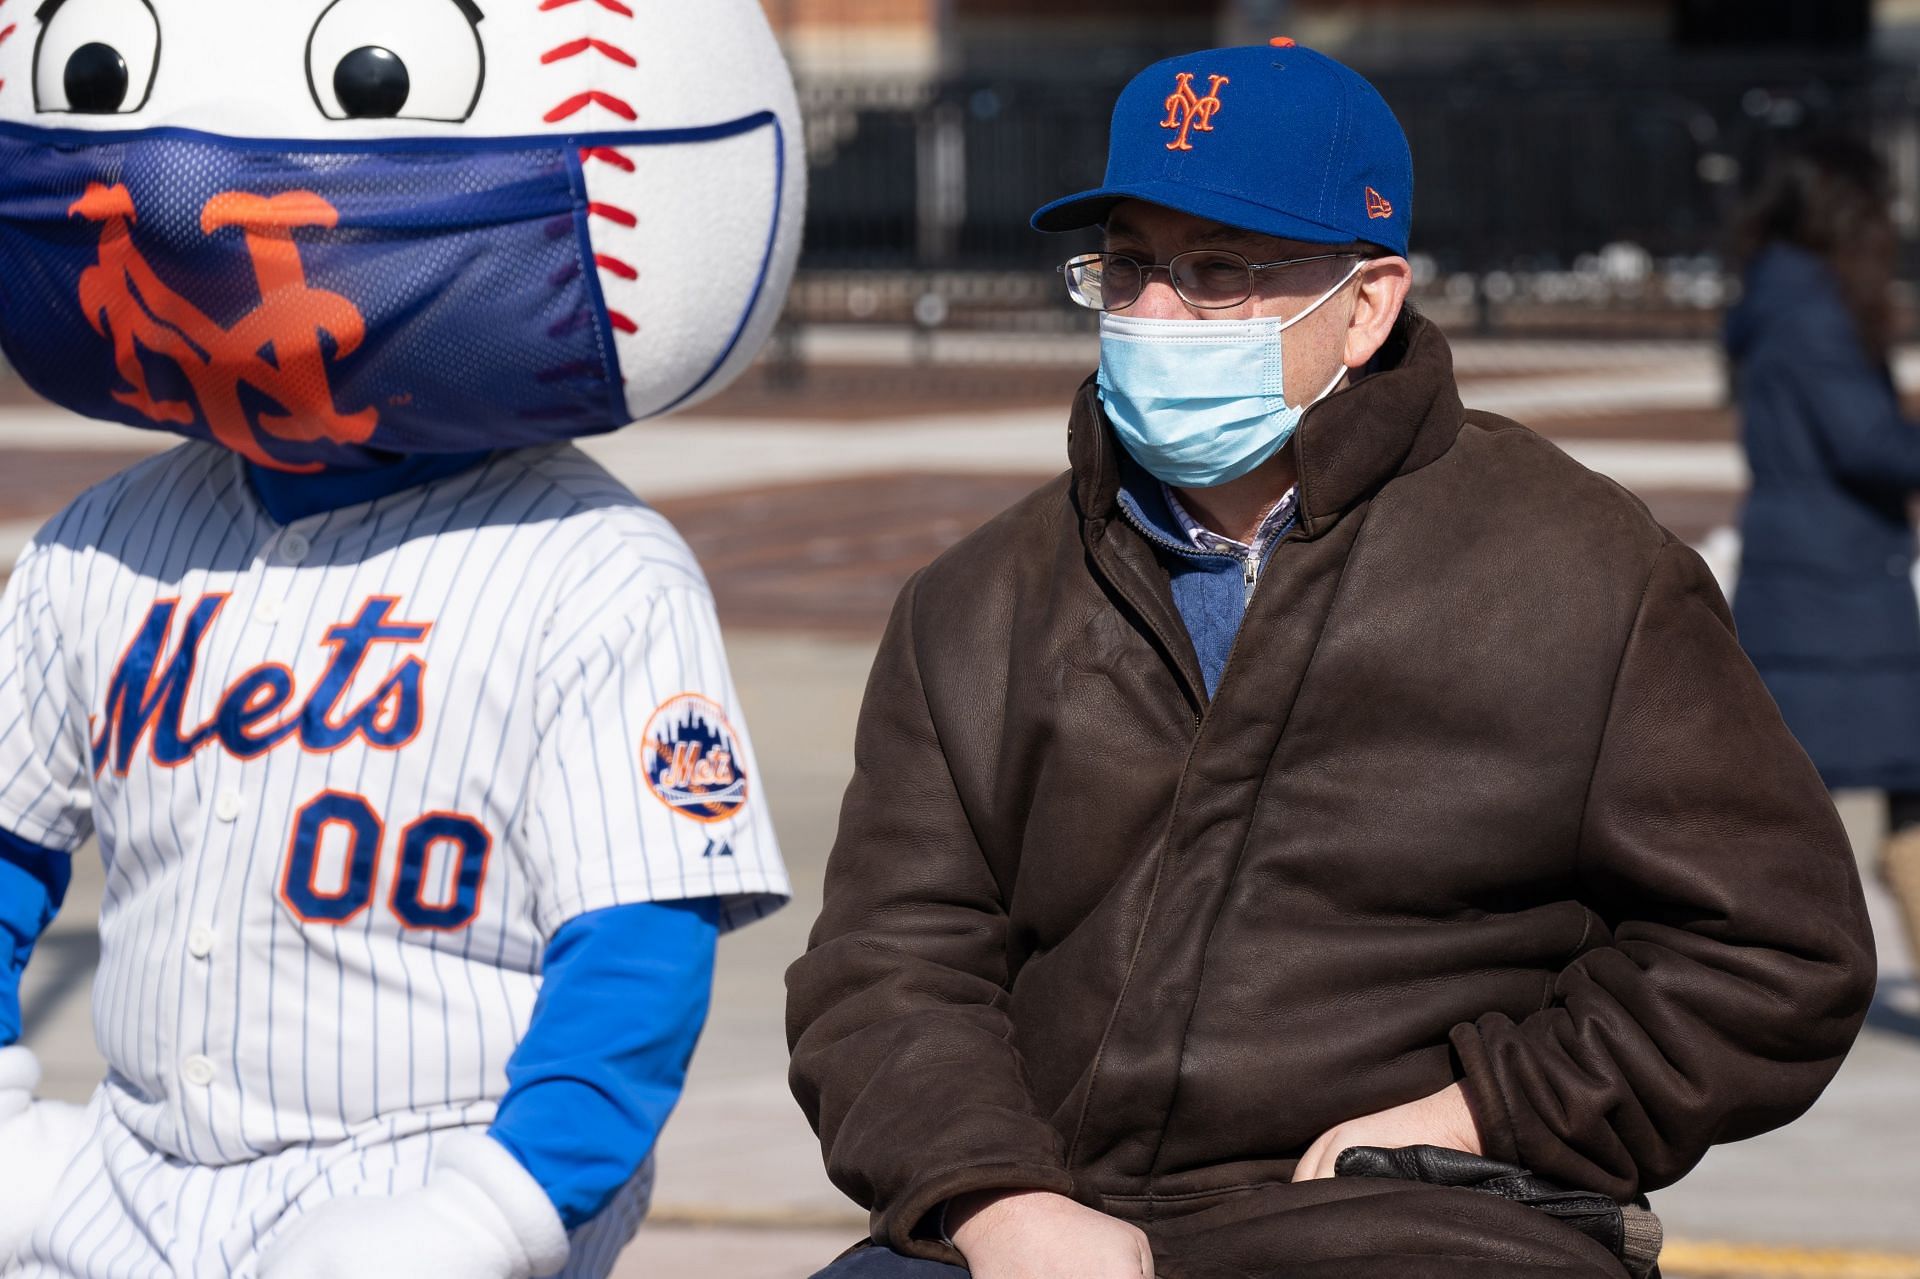 Owner Steve Cohen has spent a fortune trying to turn the Mets into a contender